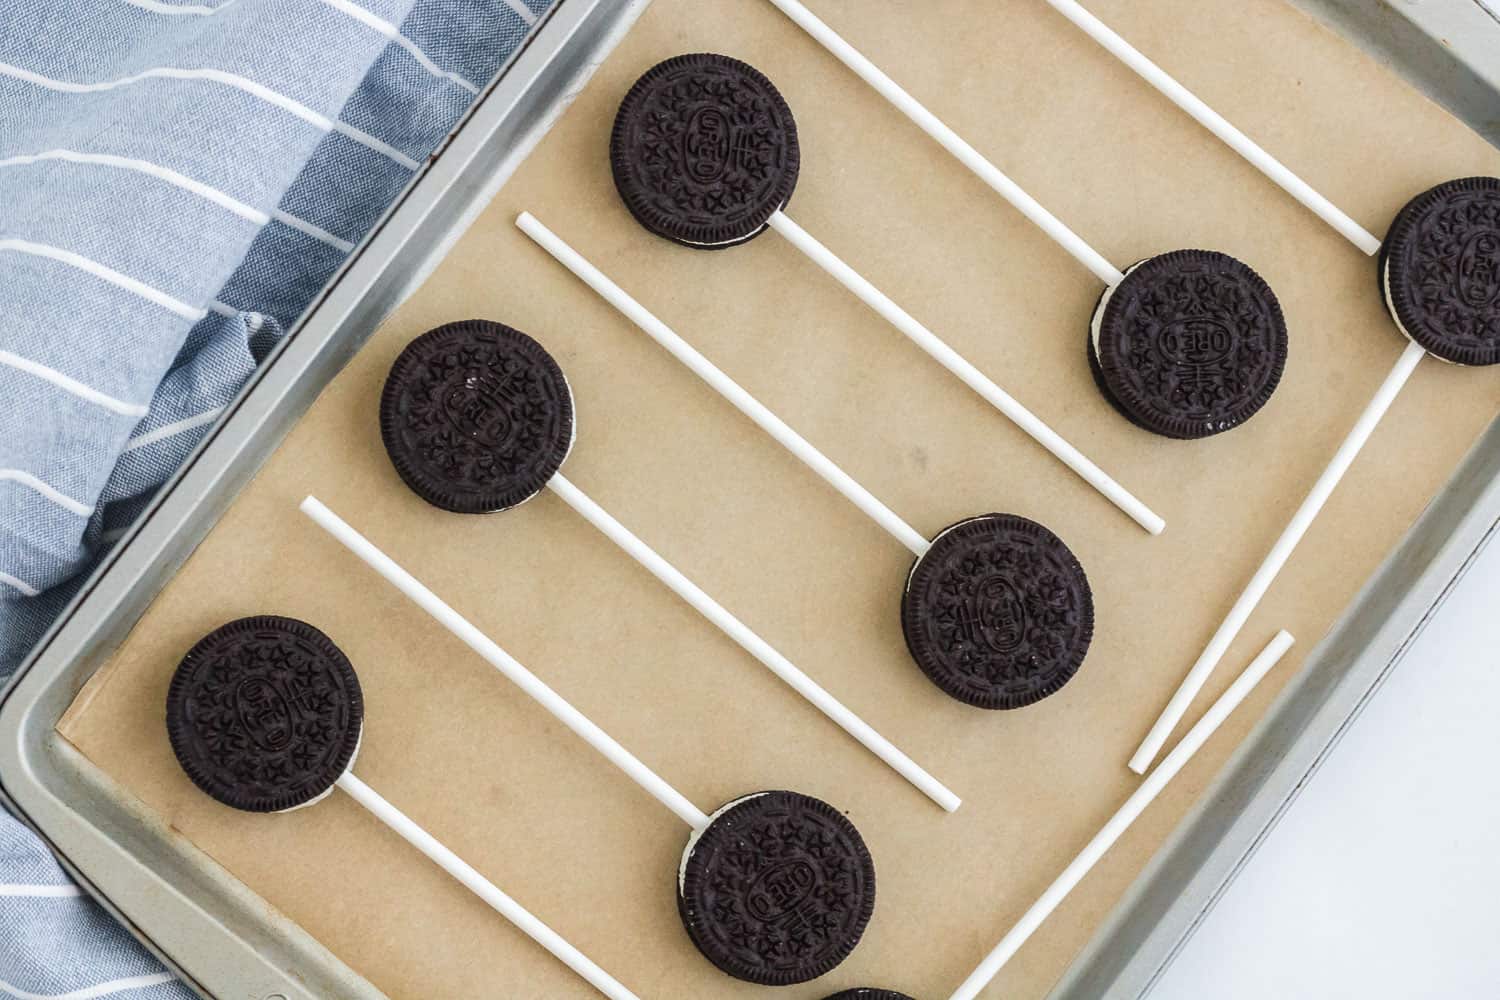 Oreos with sticks inserted in them.